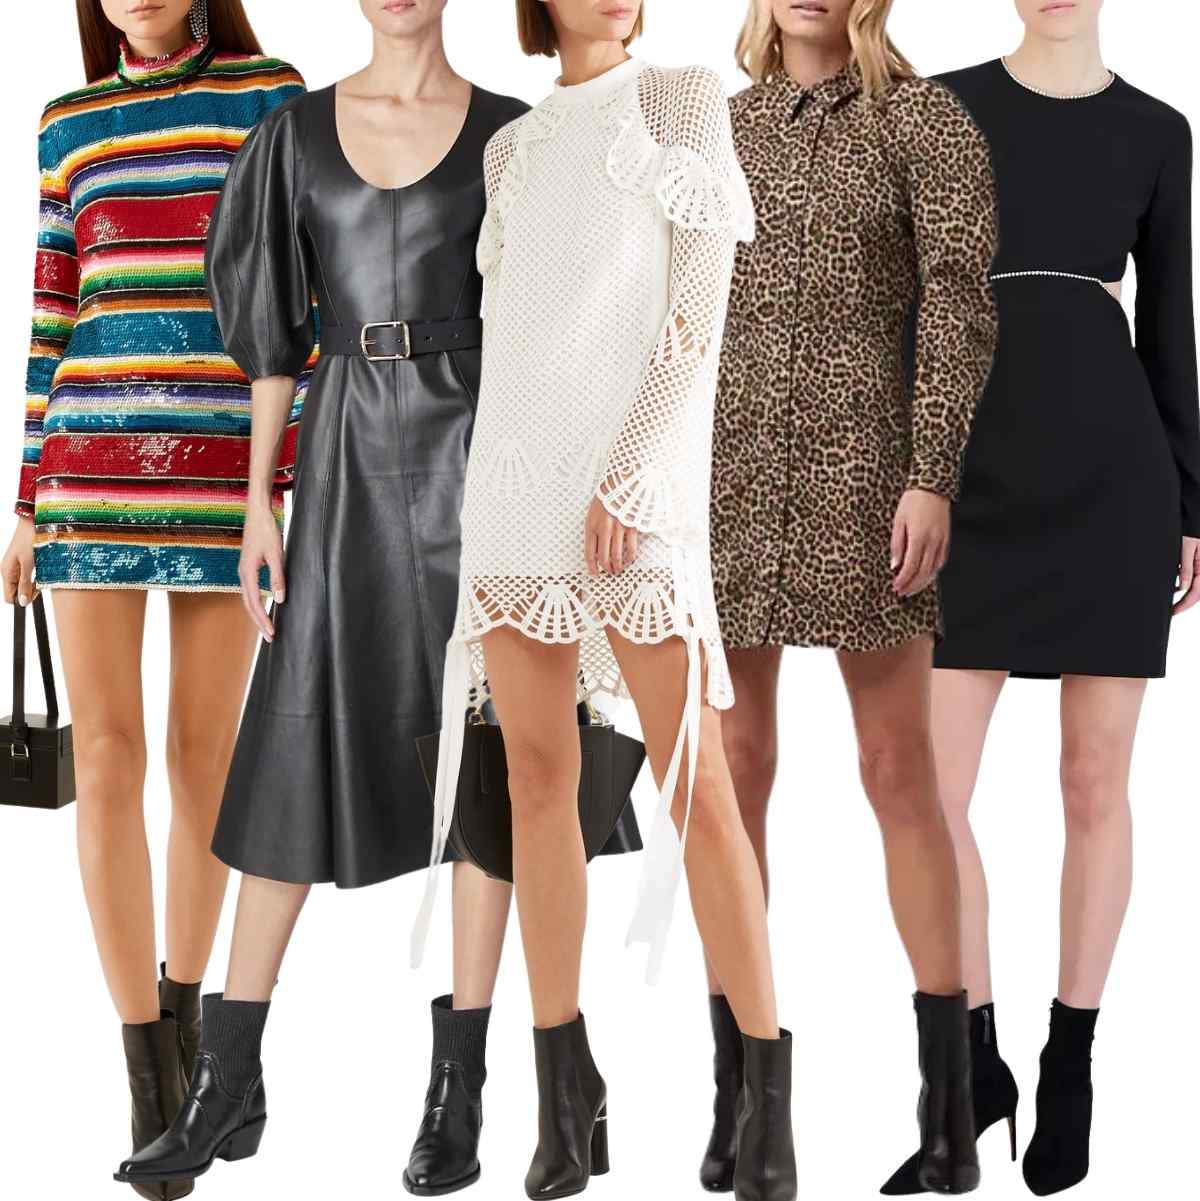 Collage of 5 women wearing different black ankle boots with dresses.